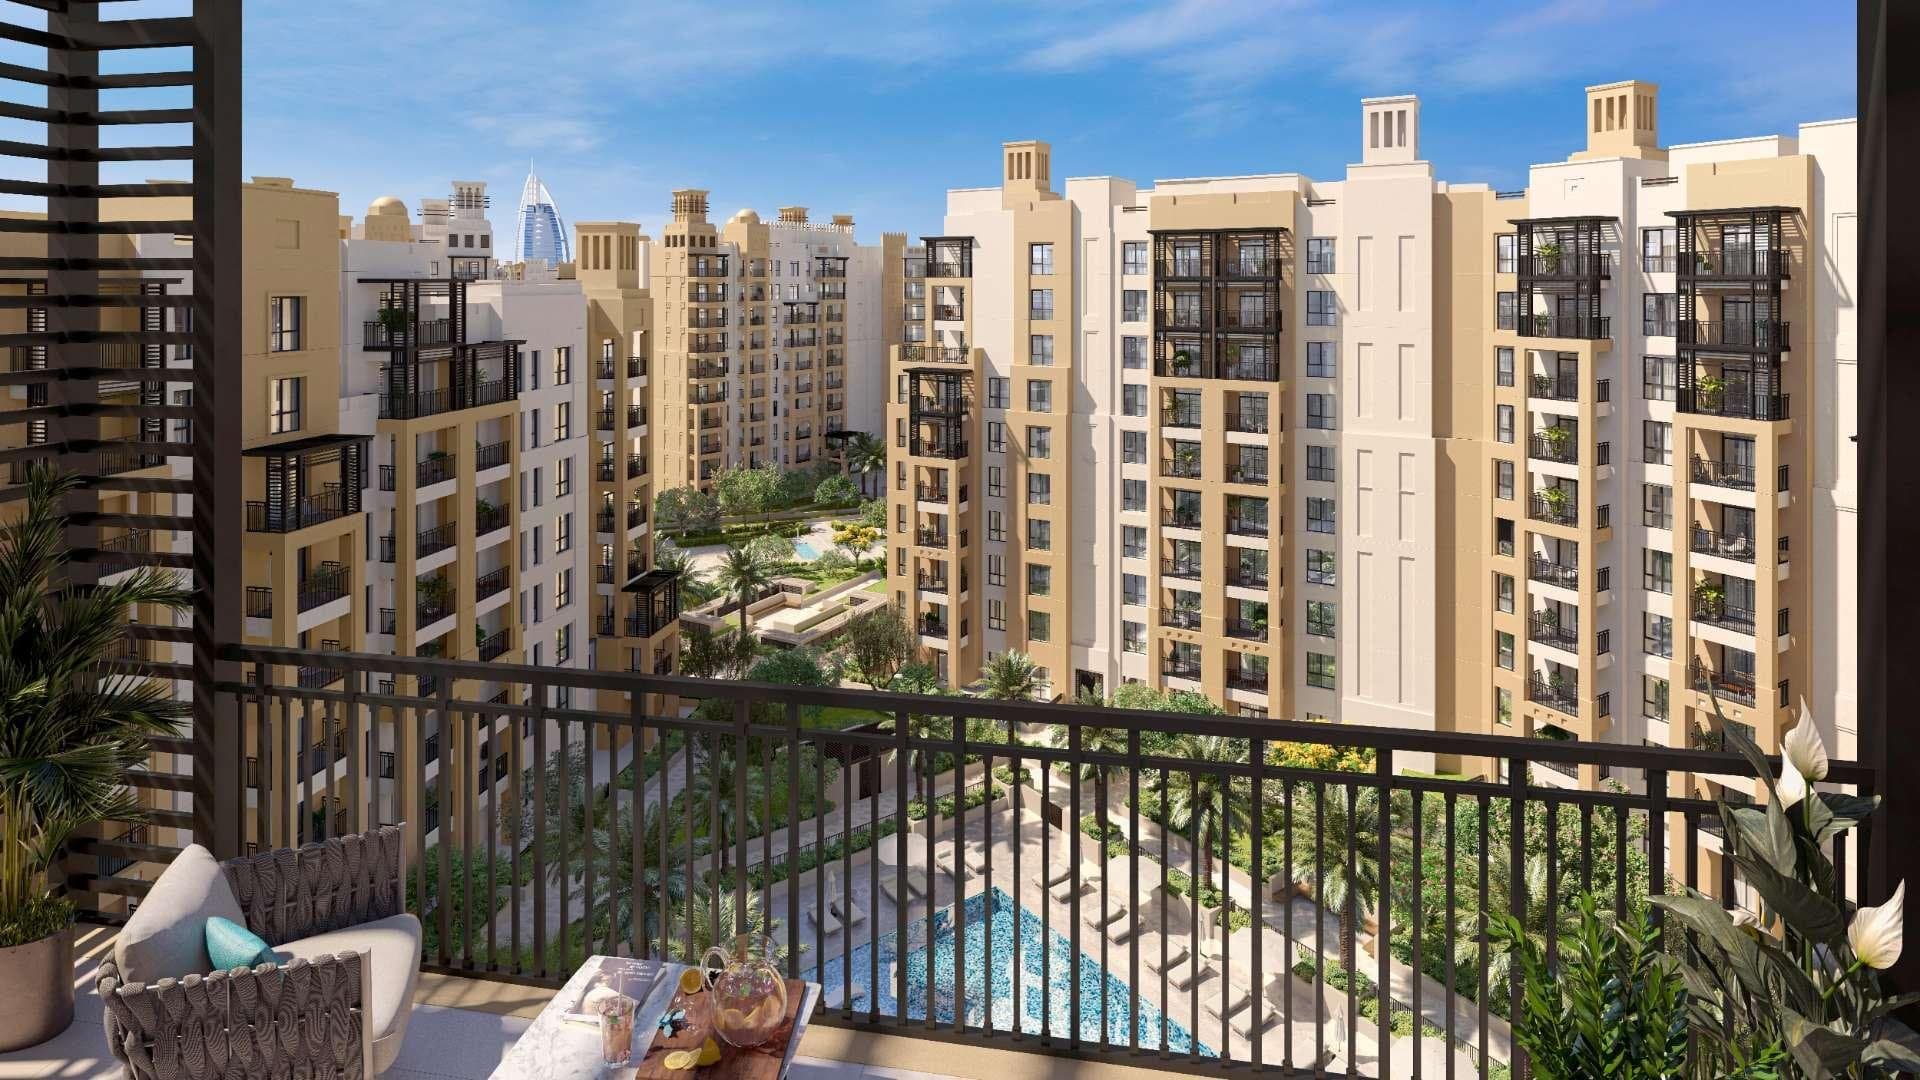 1 Bedroom Apartment For Sale Madinat Jumeirah Living Lp14977 Cbed8cbbee1af80.jpg